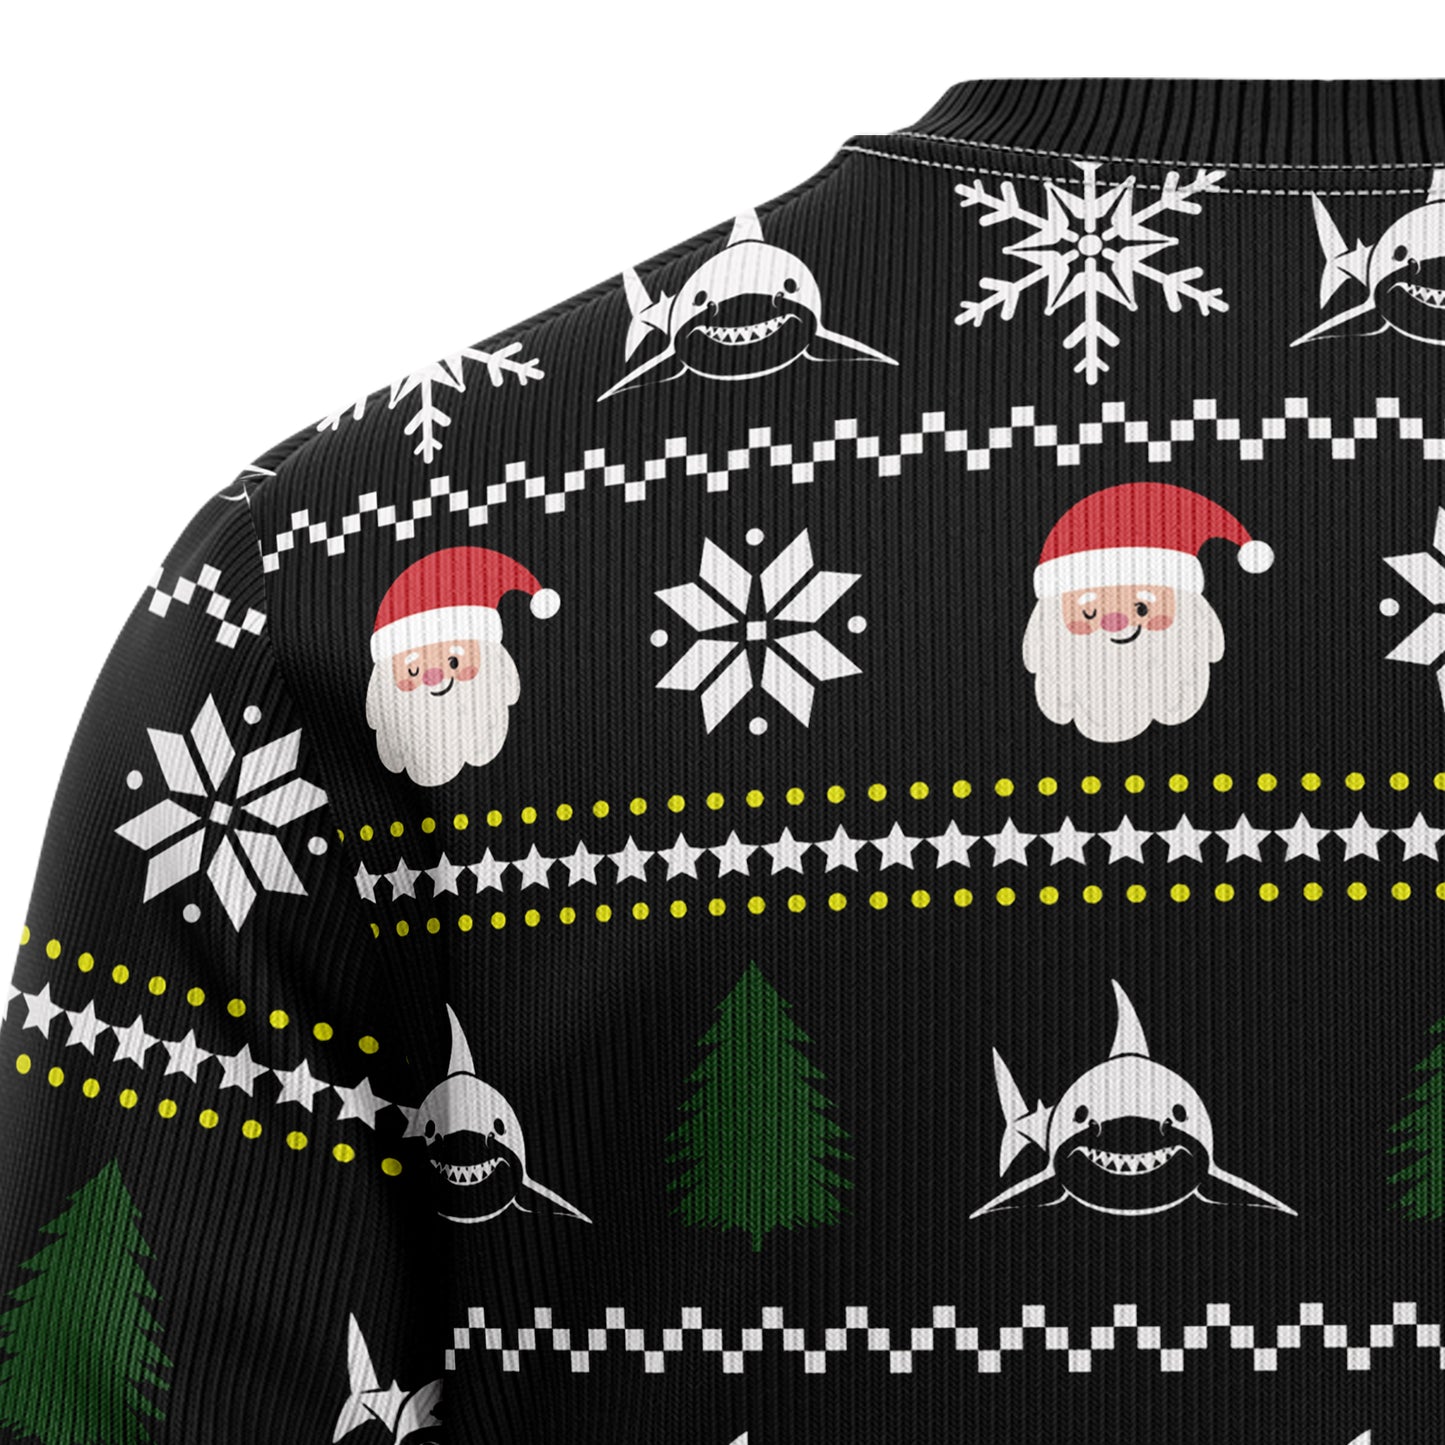 Santa Jaws TY210 Ugly Christmas Sweater